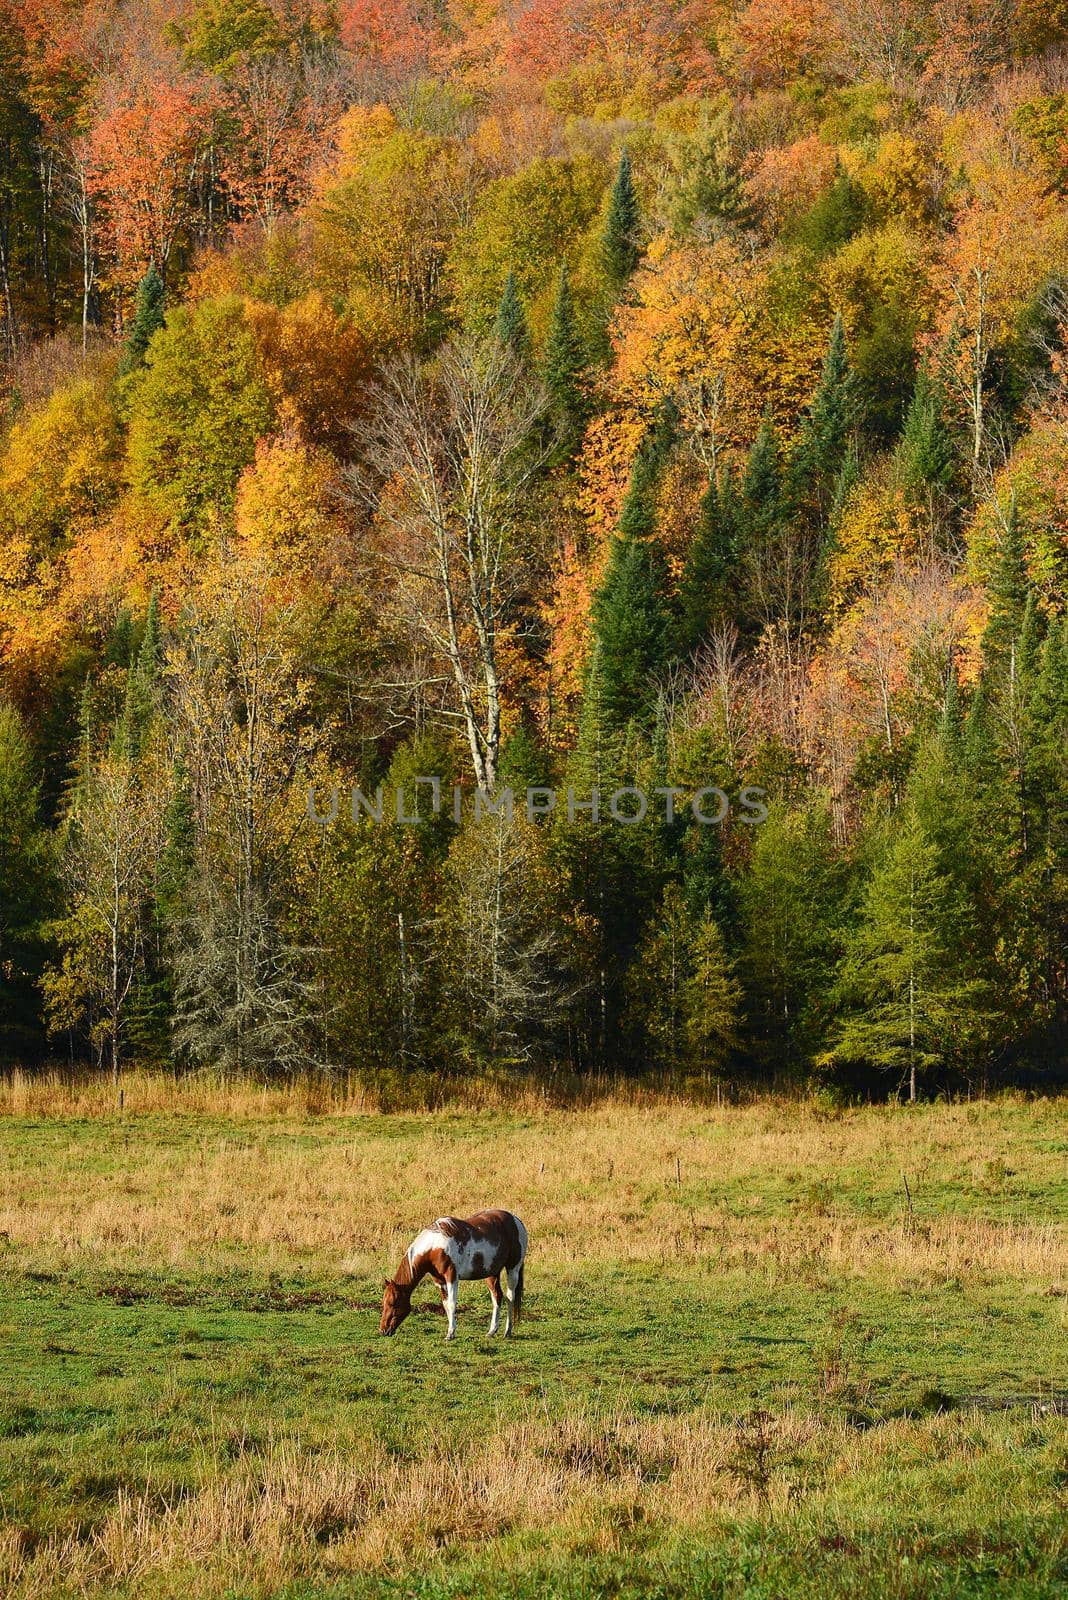 a brown horse in a local farm in vermont with fall foliage 